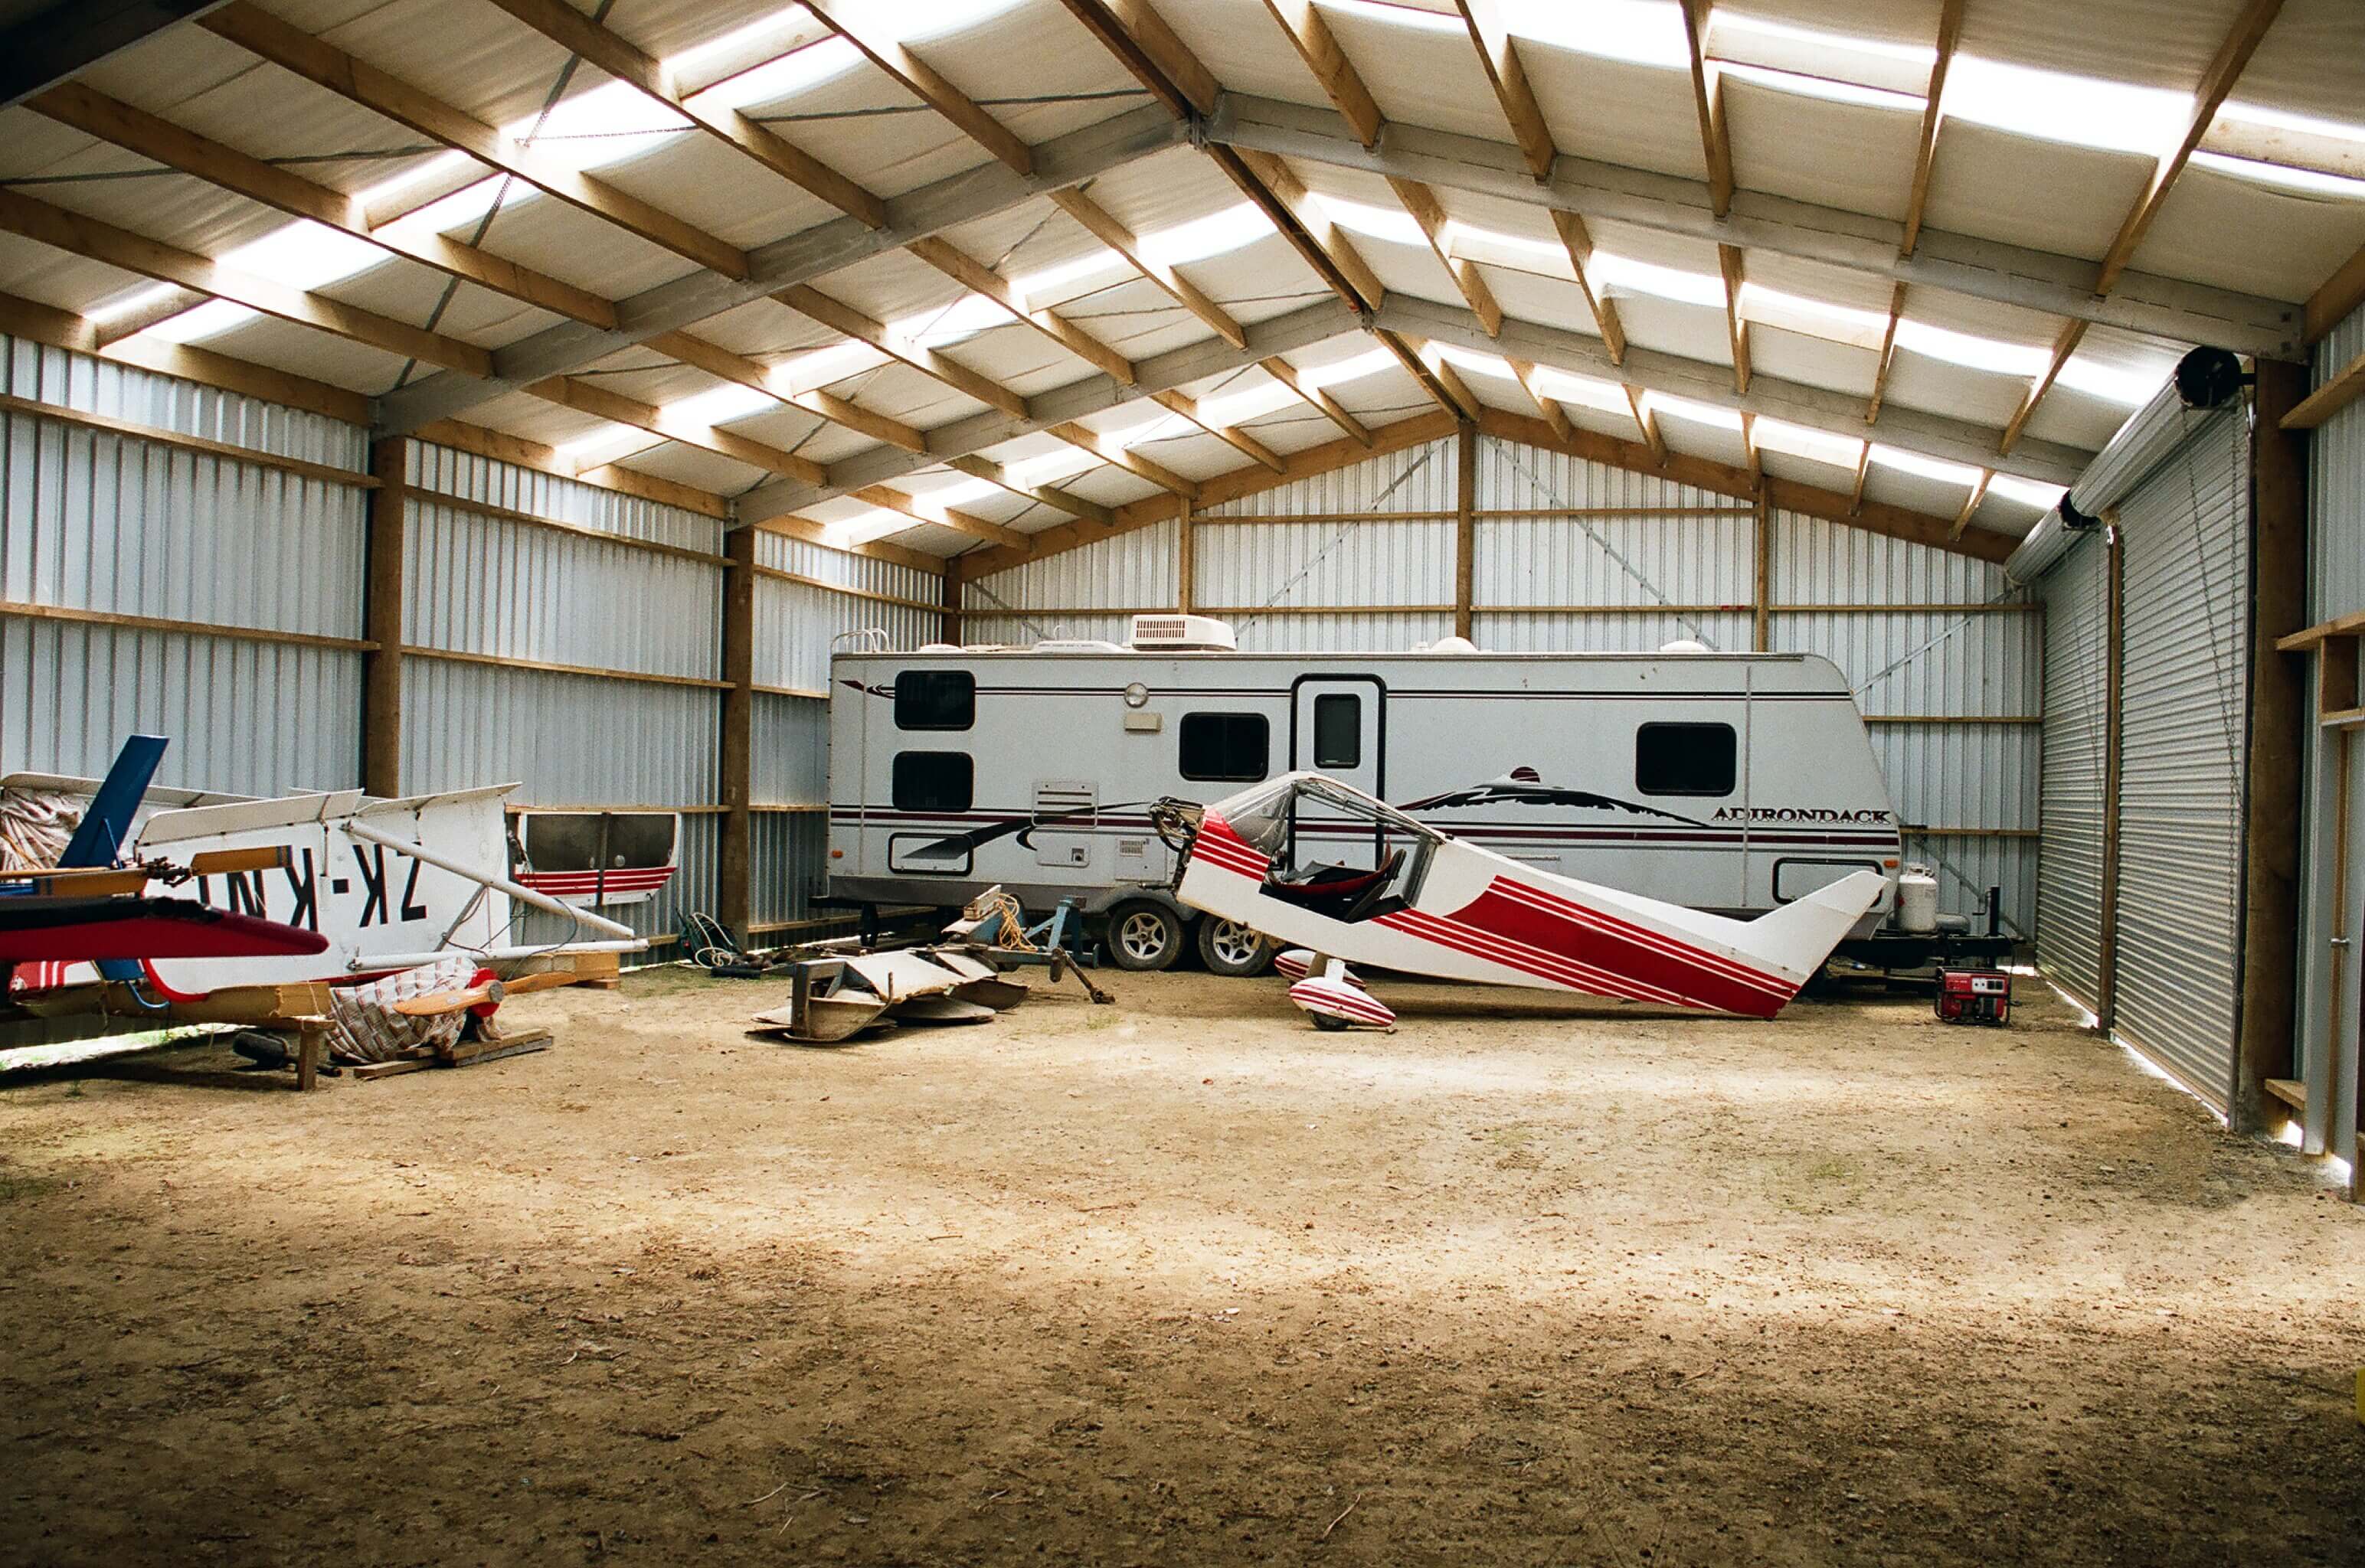 Clear light panels allow for natural daylight to open up your hangar